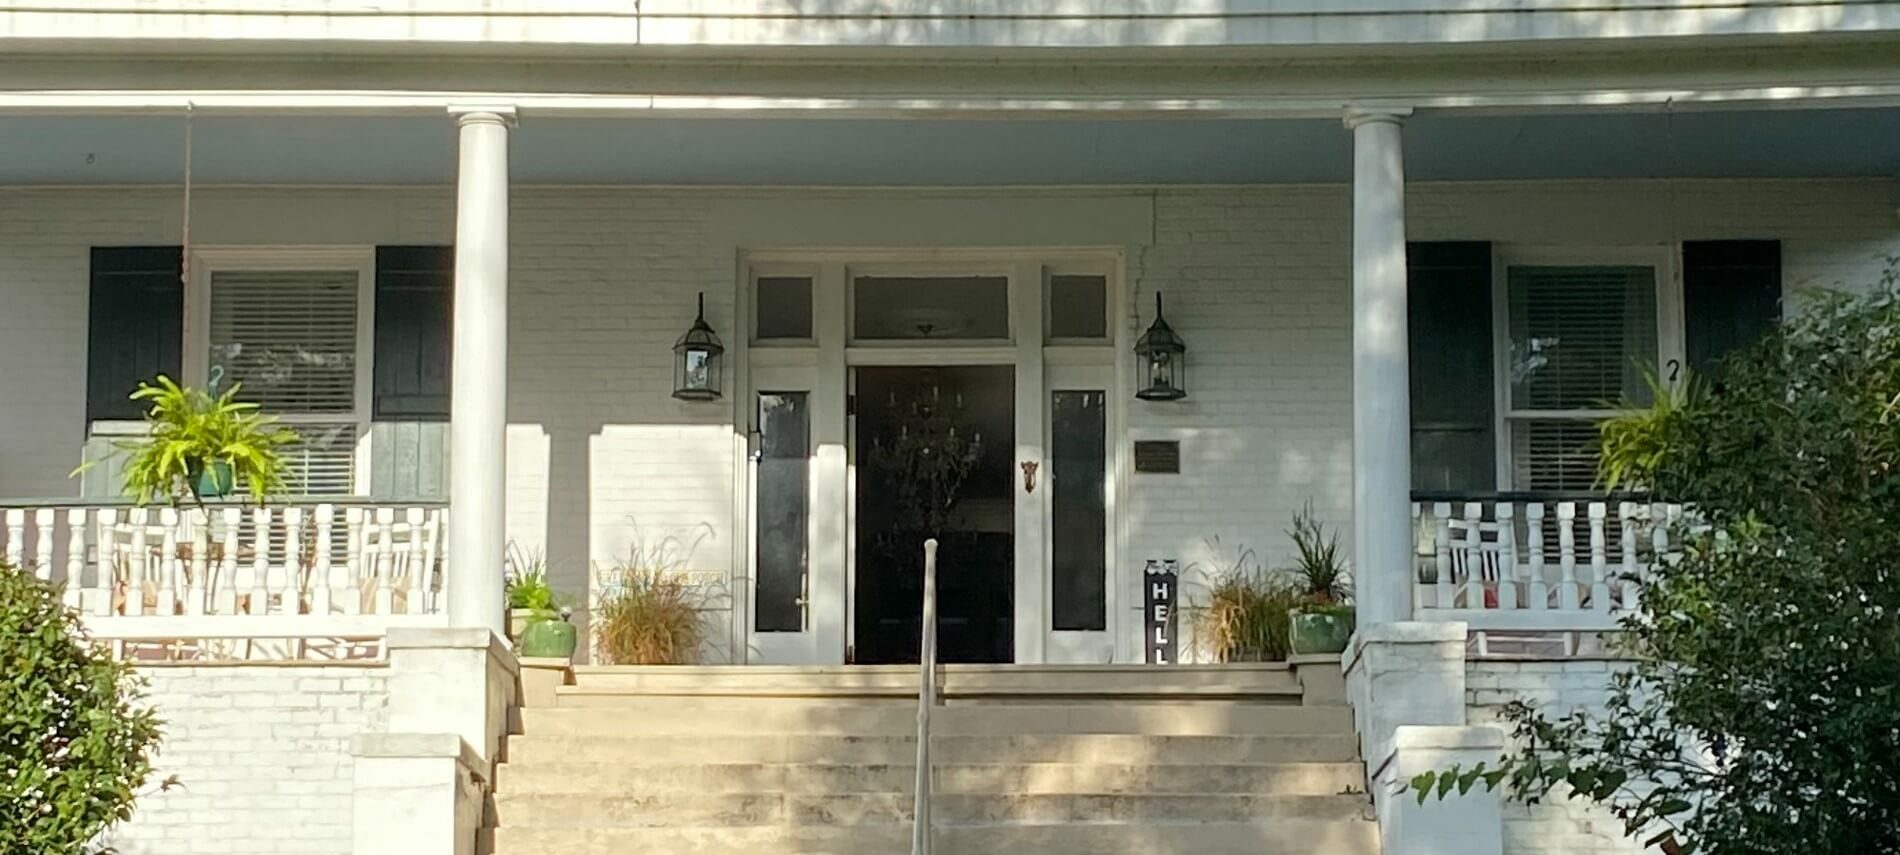 Kings Daughters Welcoming Front Porch